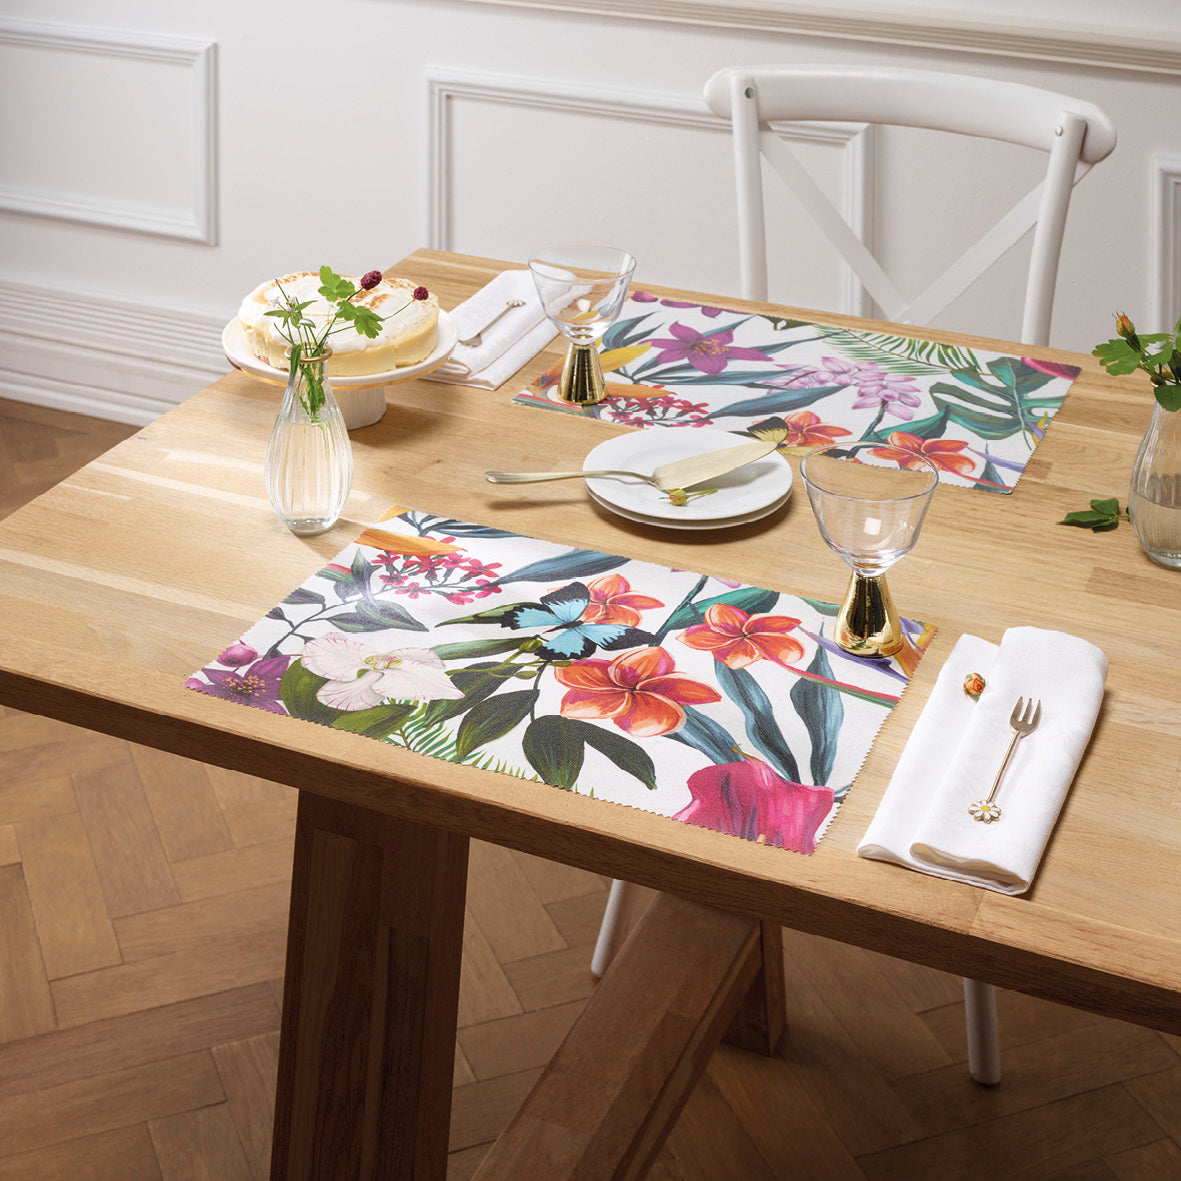 Set of 2 placemats - Oasis Multicolor